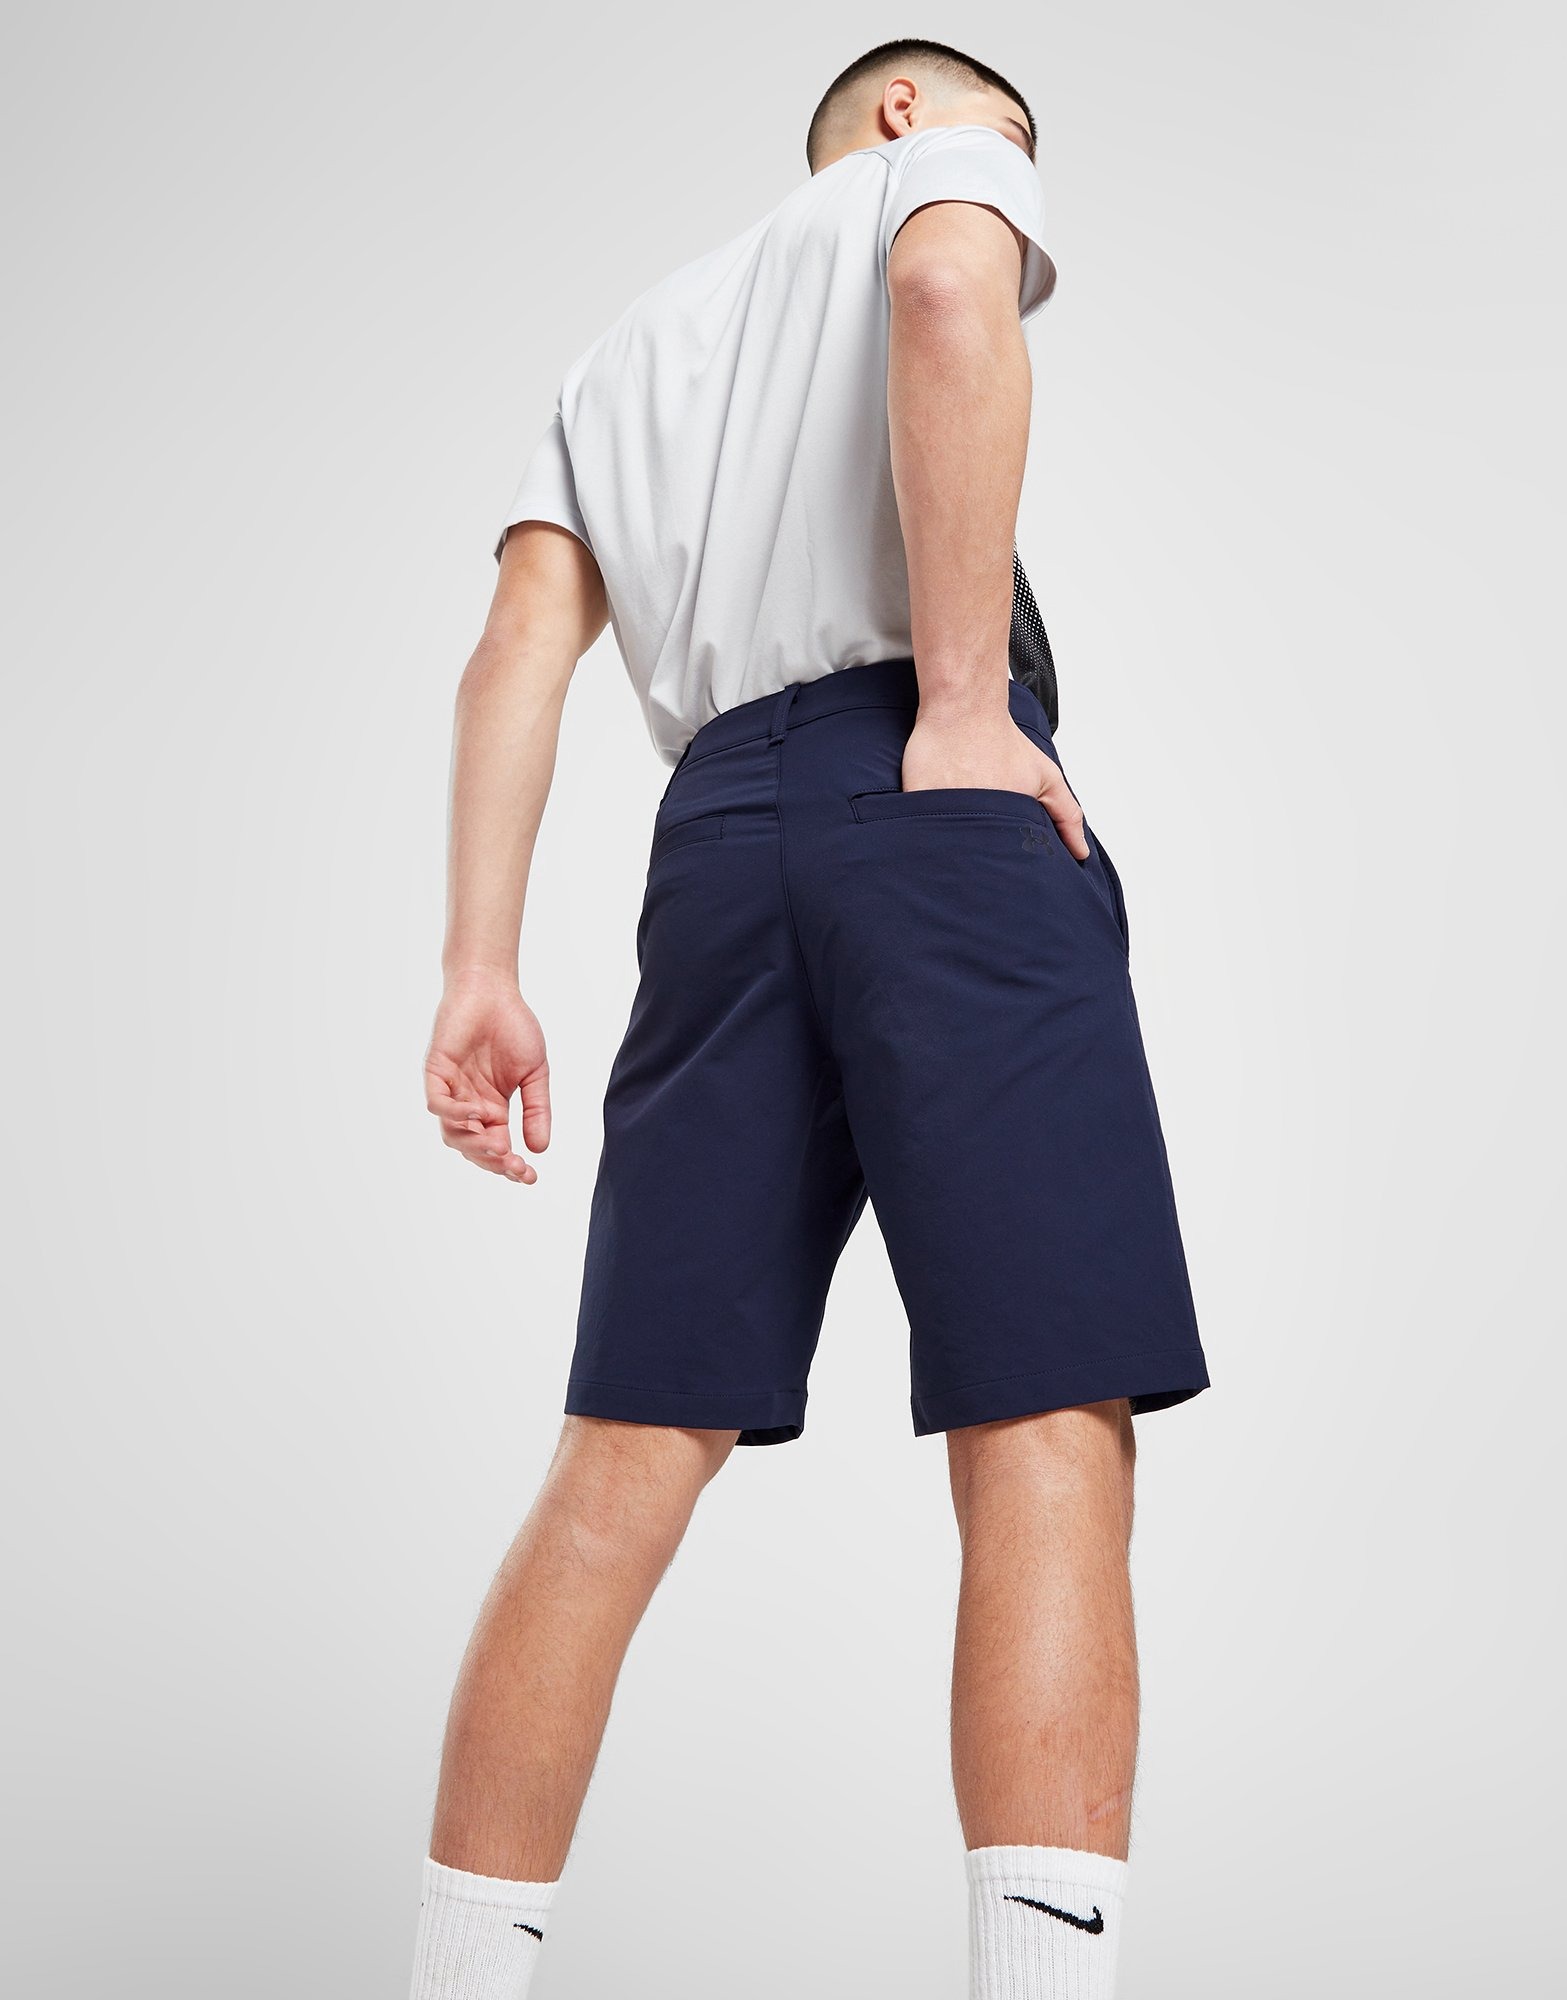 Blue Under Armour Golf Shorts | Sports Global